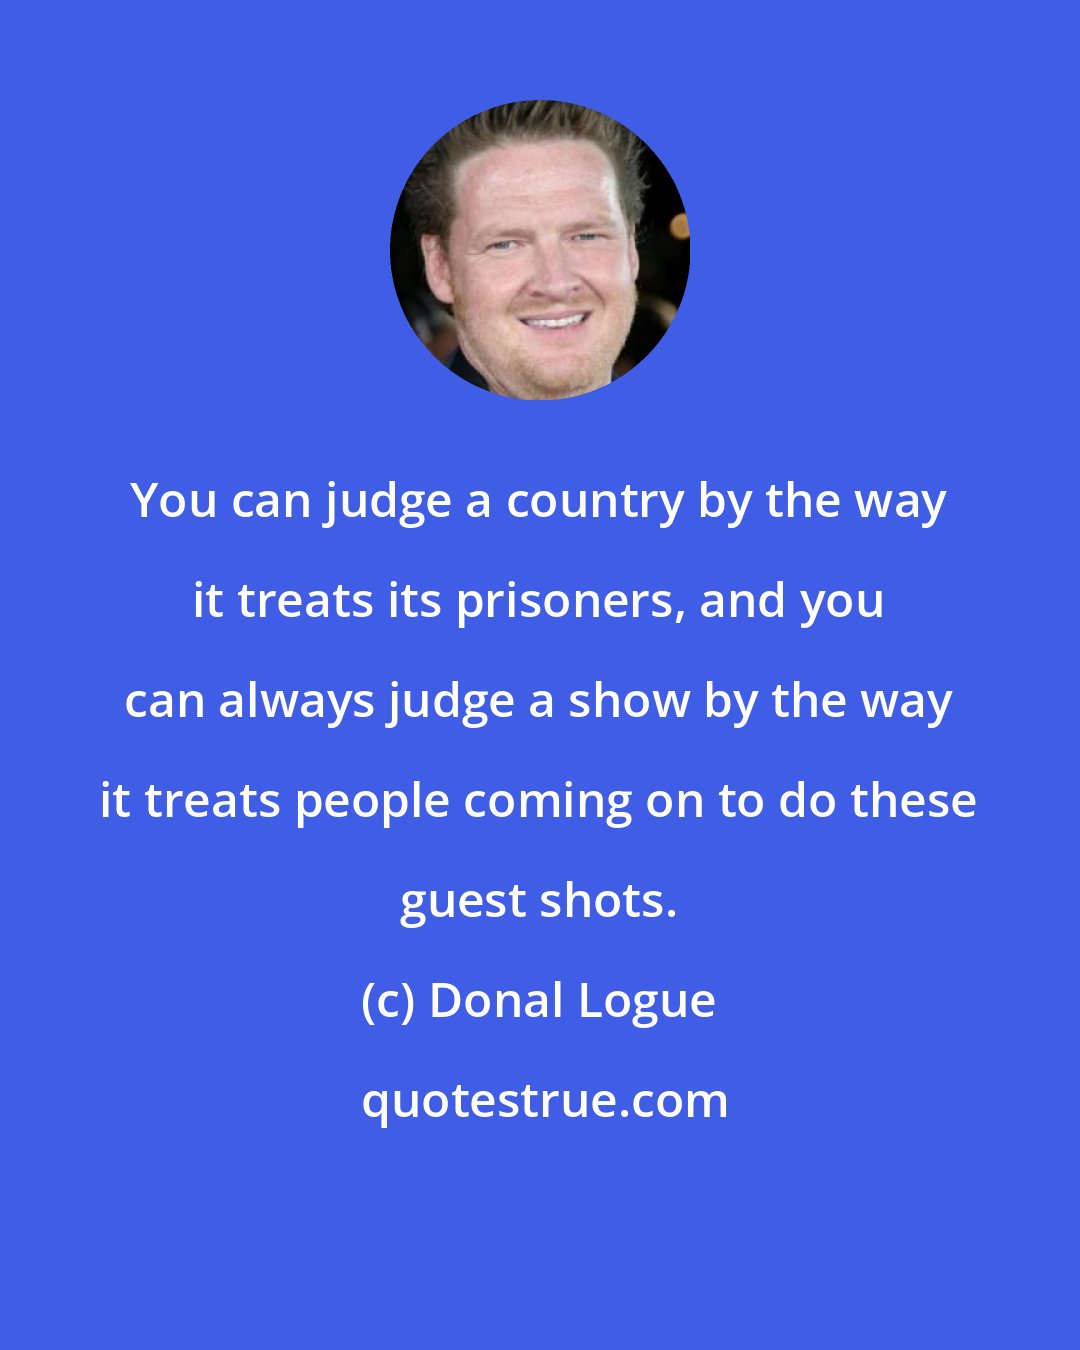 Donal Logue: You can judge a country by the way it treats its prisoners, and you can always judge a show by the way it treats people coming on to do these guest shots.